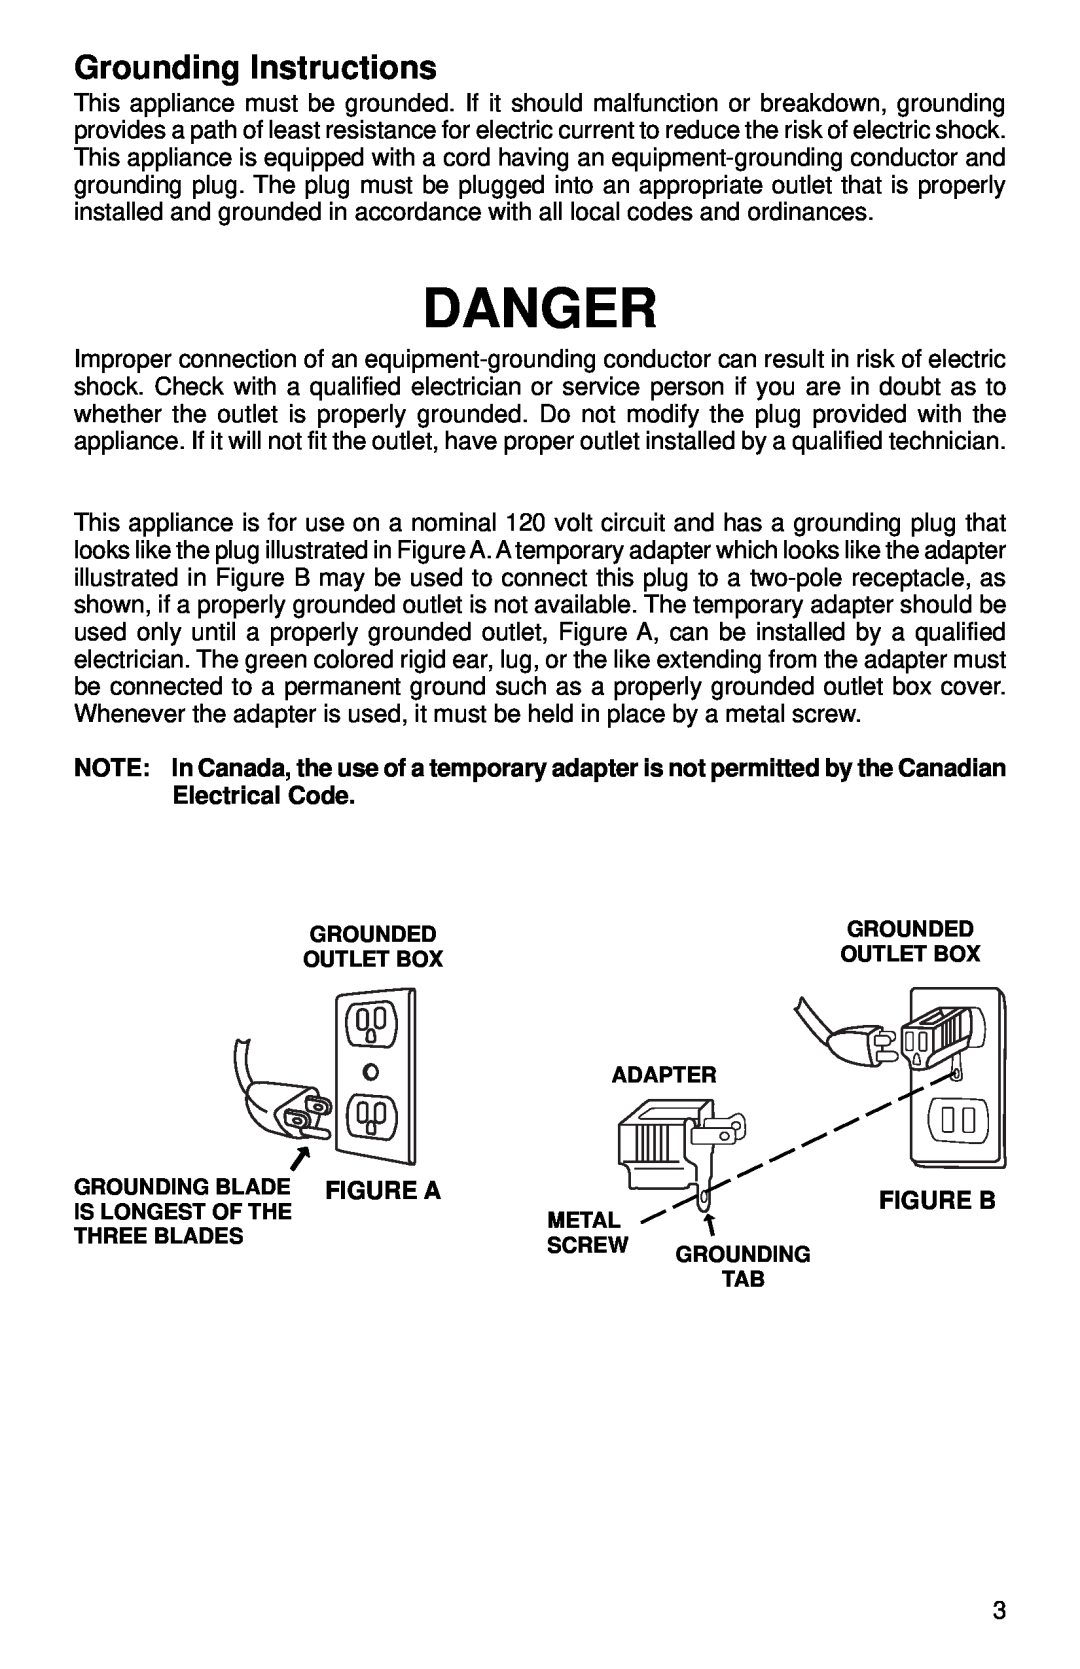 Sanitaire SC785 SERIES Danger, Grounding Instructions, Grounding Blade Is Longest Of The Three Blades, Grounded Outlet Box 